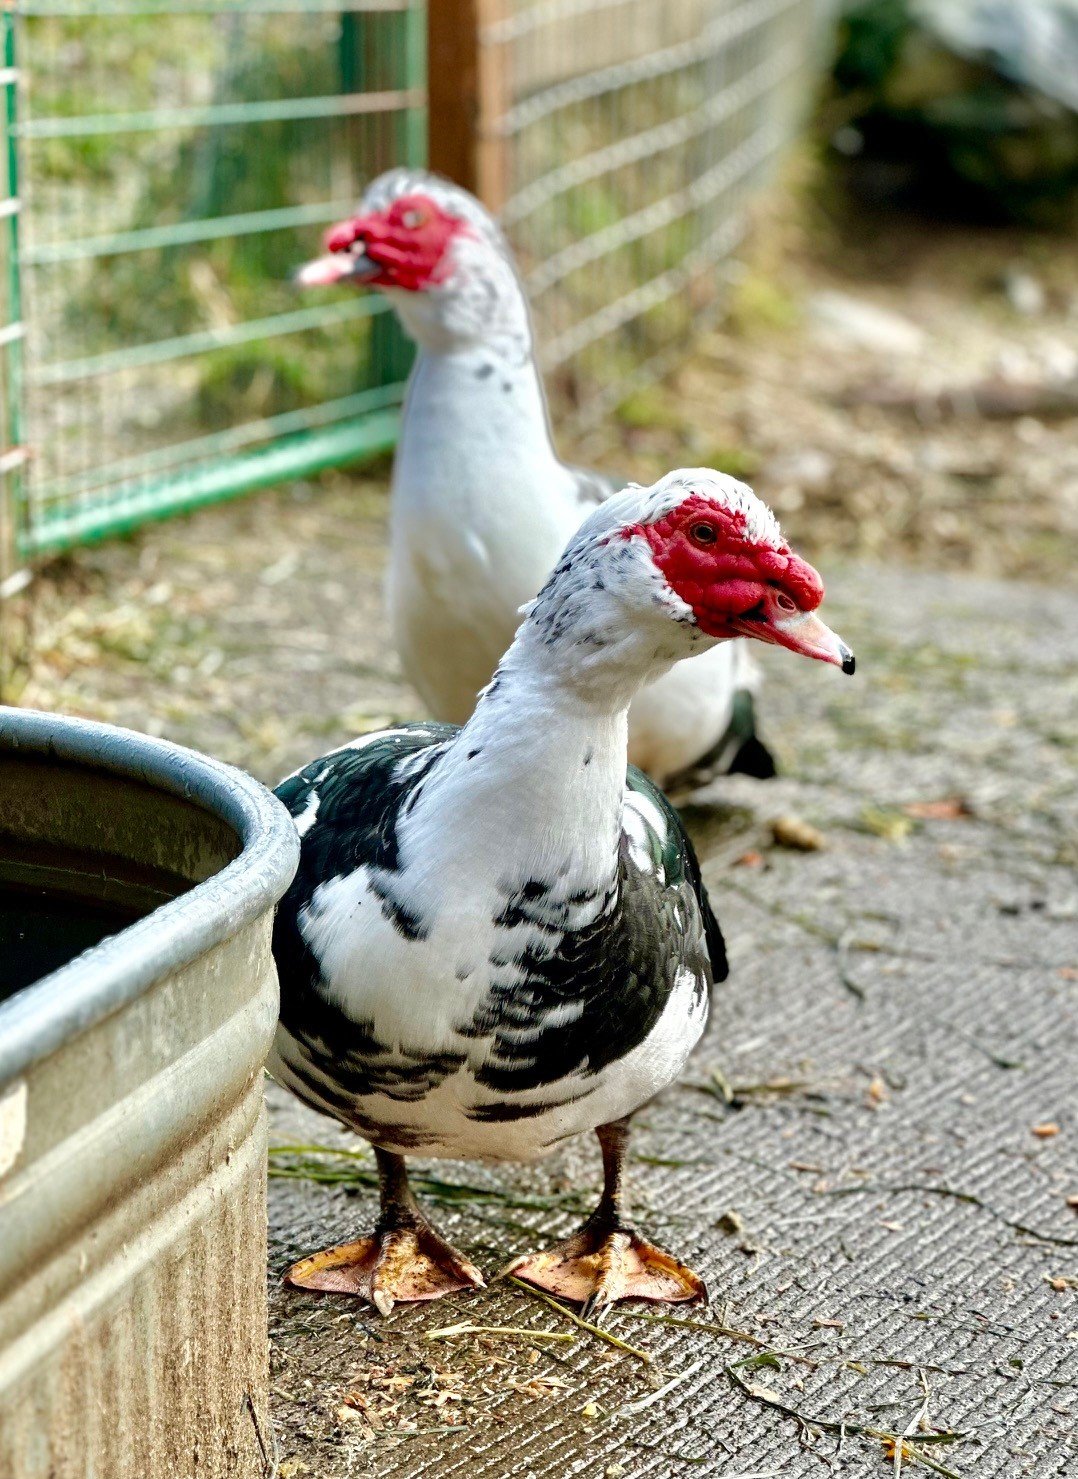 These Muscovy ducks rescued from the hoarding situation healed up under the loving care of Center Valley Animal Rescue.